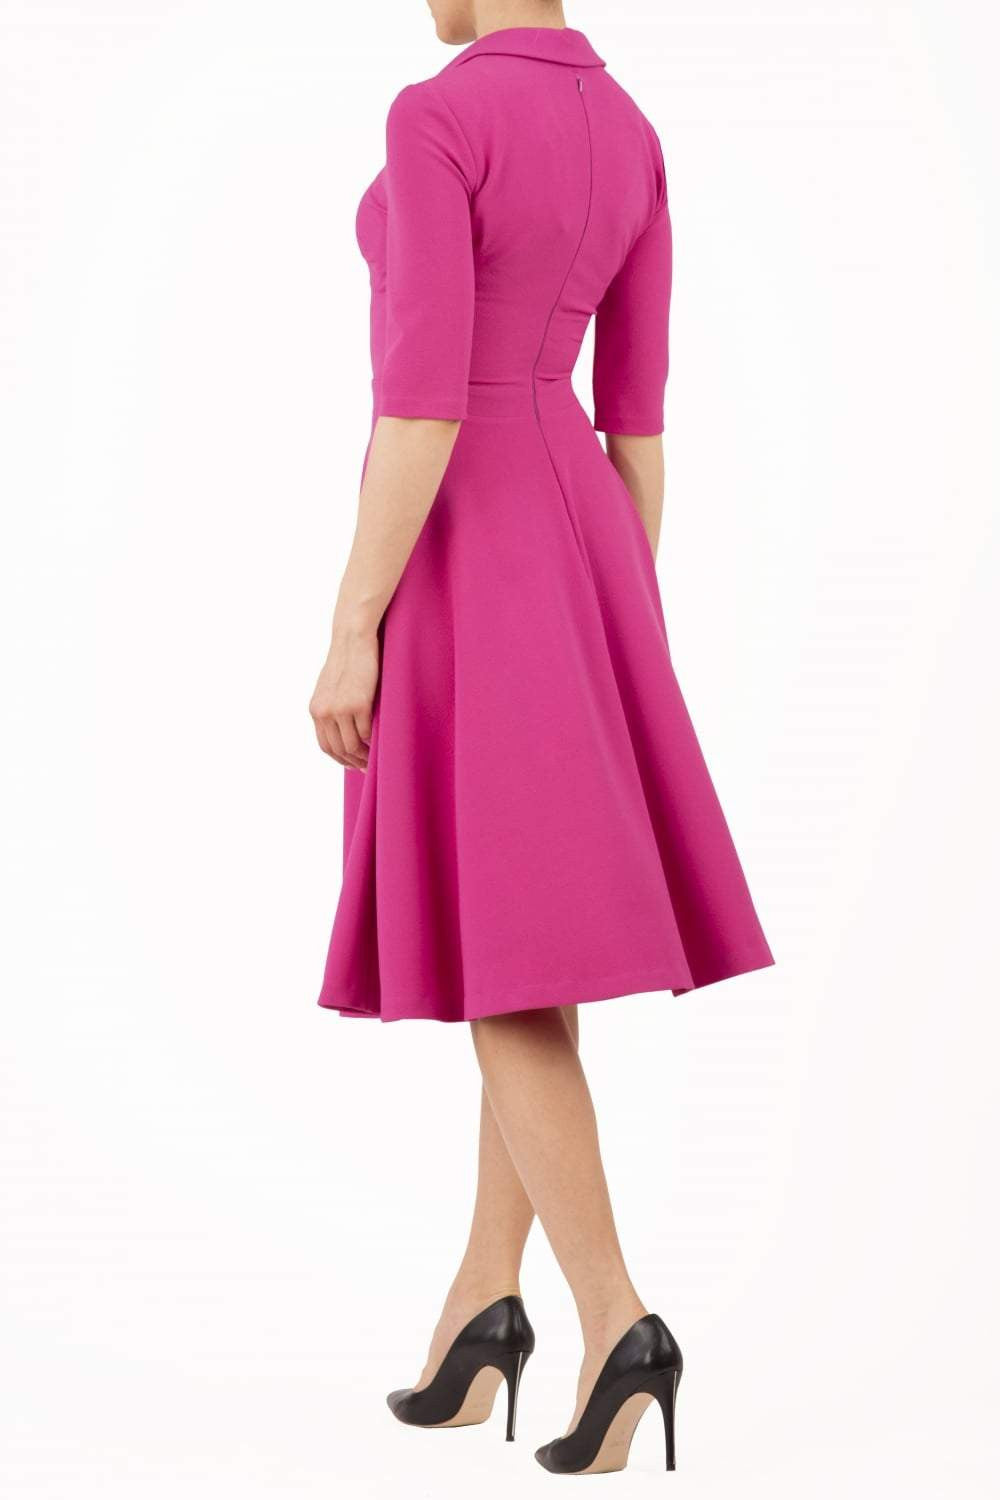 Model wearing the Diva Annette Swing Dress with V shaped neckline with zip detail in fuschia pink back image